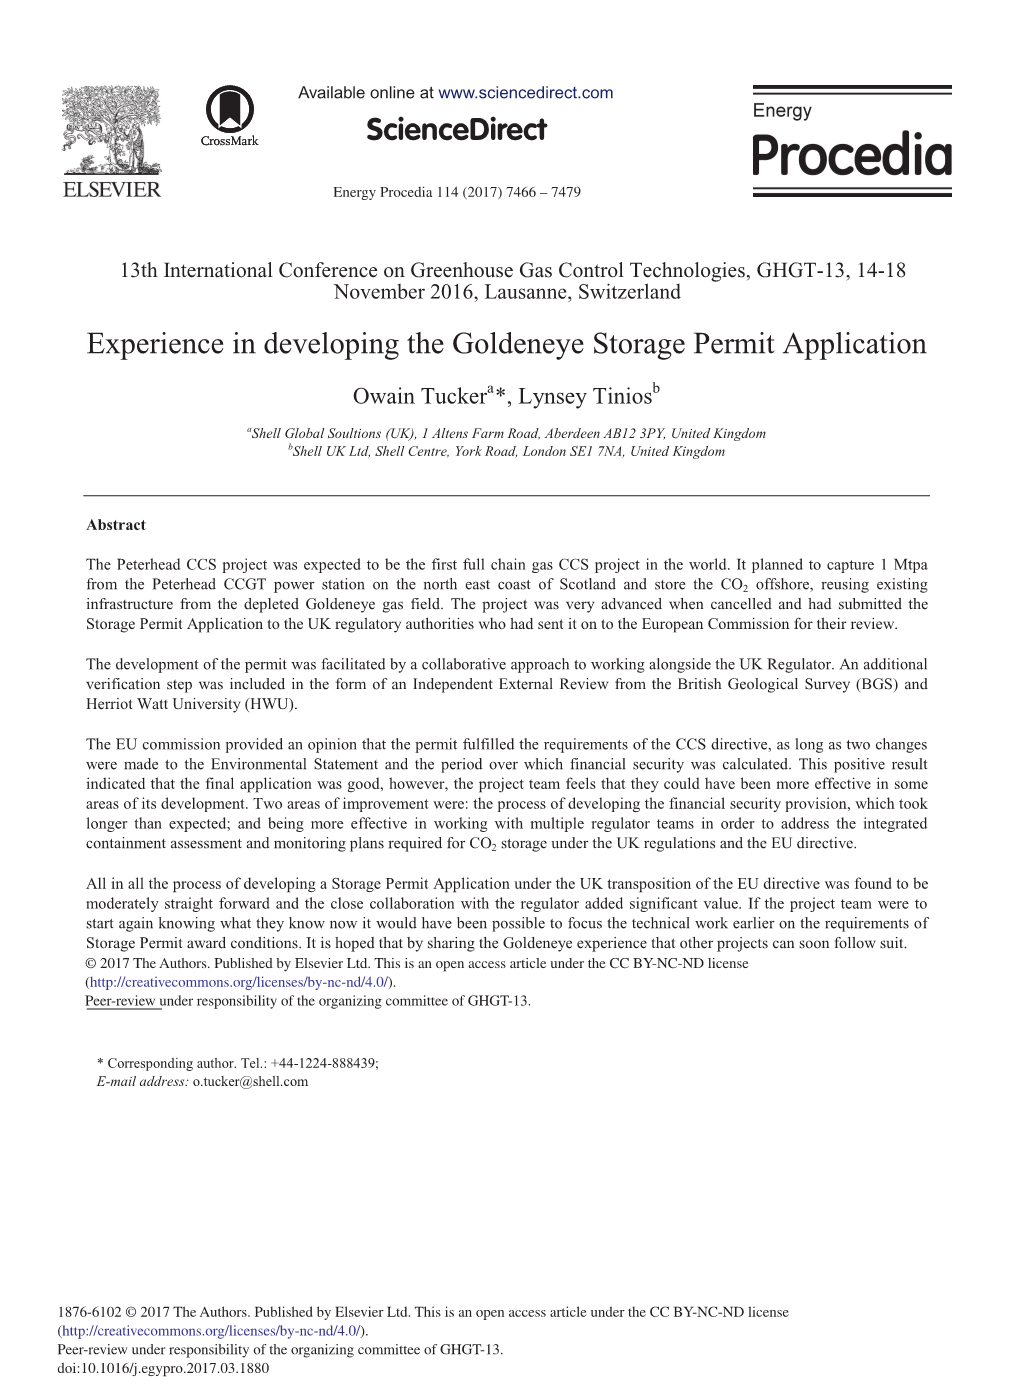 Experience in Developing the Goldeneye Storage Permit Application